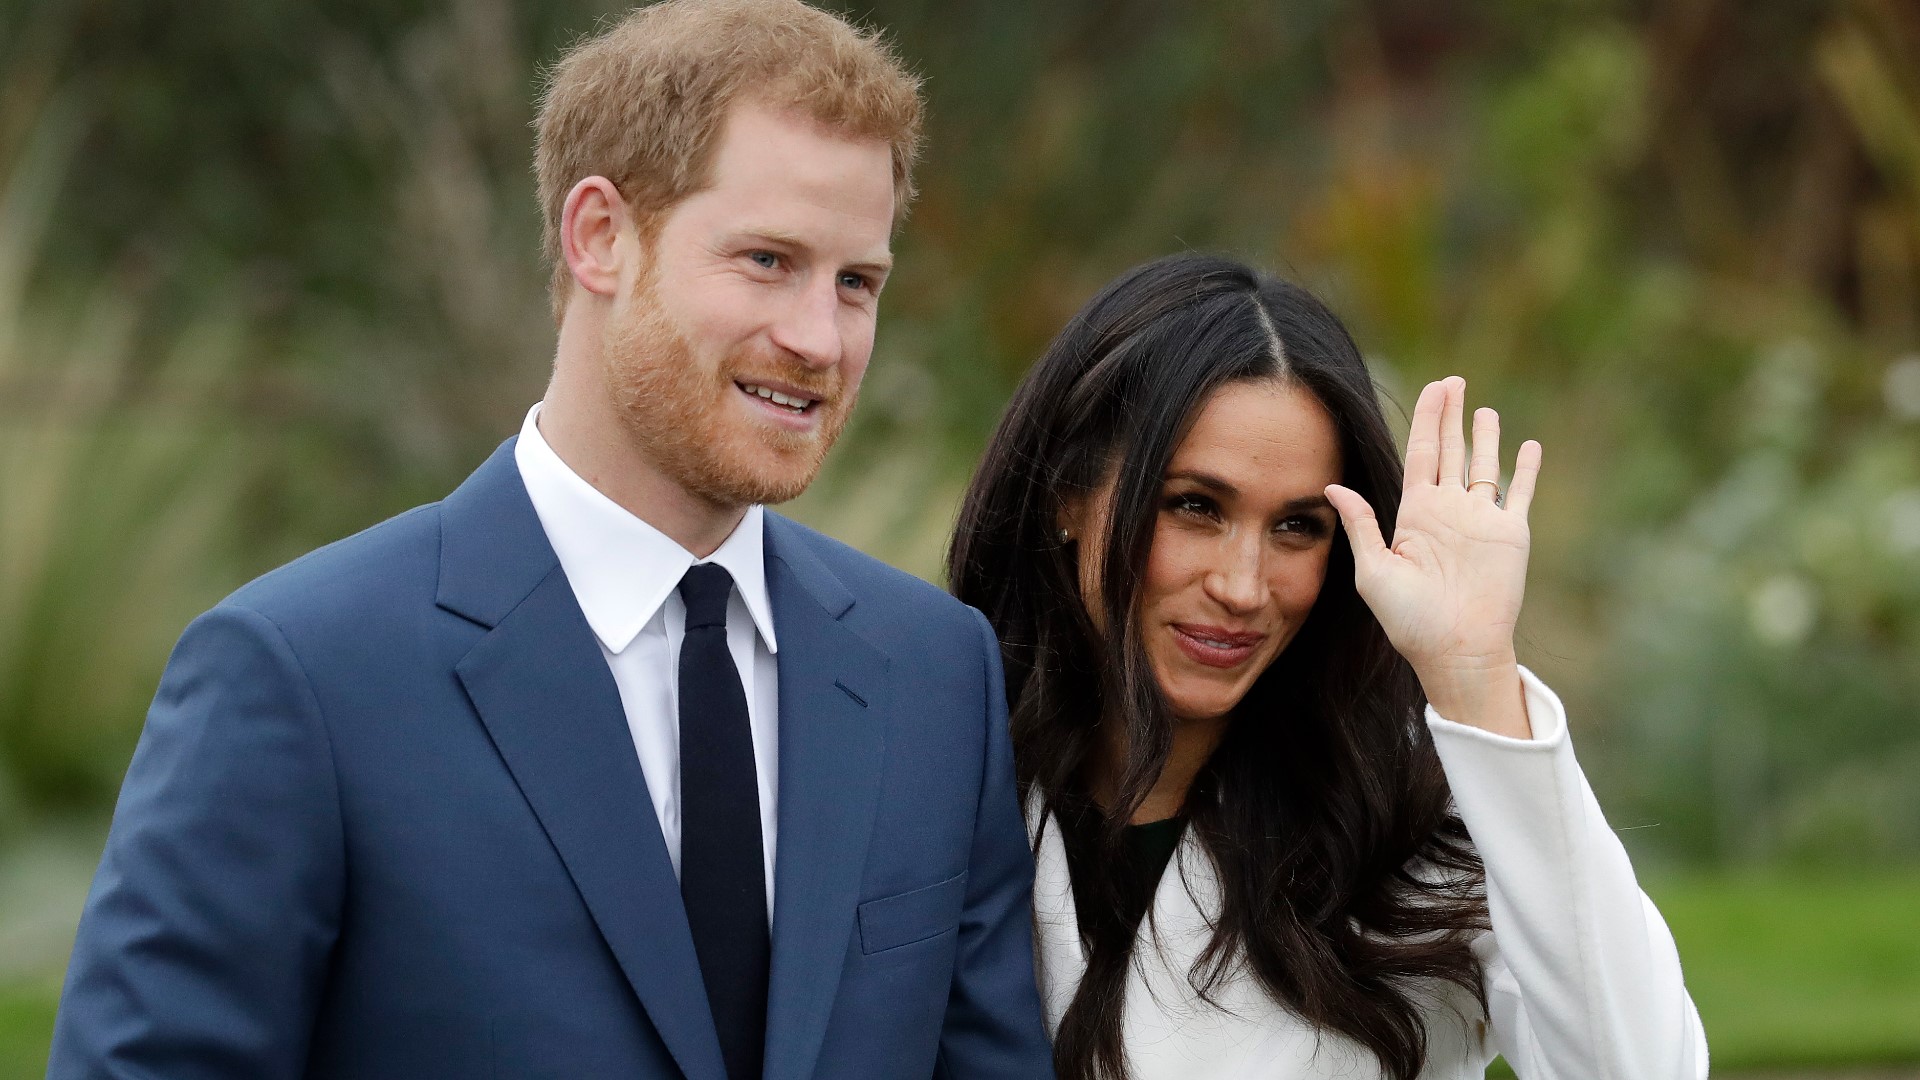 Prince Harry and Meghan were pursued by photographers in cars after a charity event in New York in an incident that the mayor described as potentially dangerous.